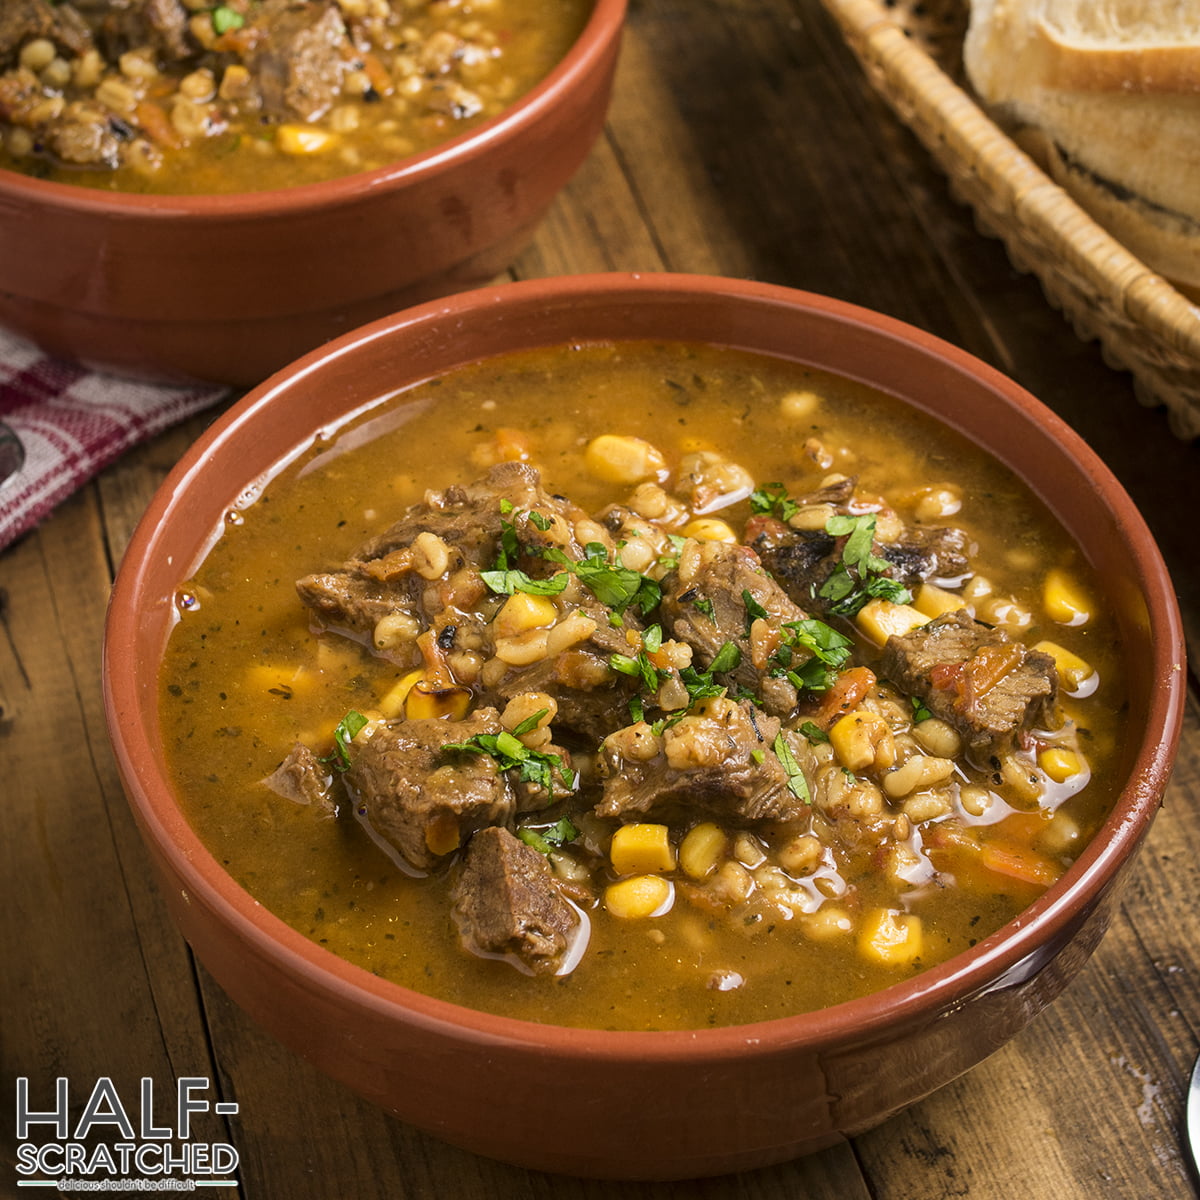 Bowl of beef and barley soup